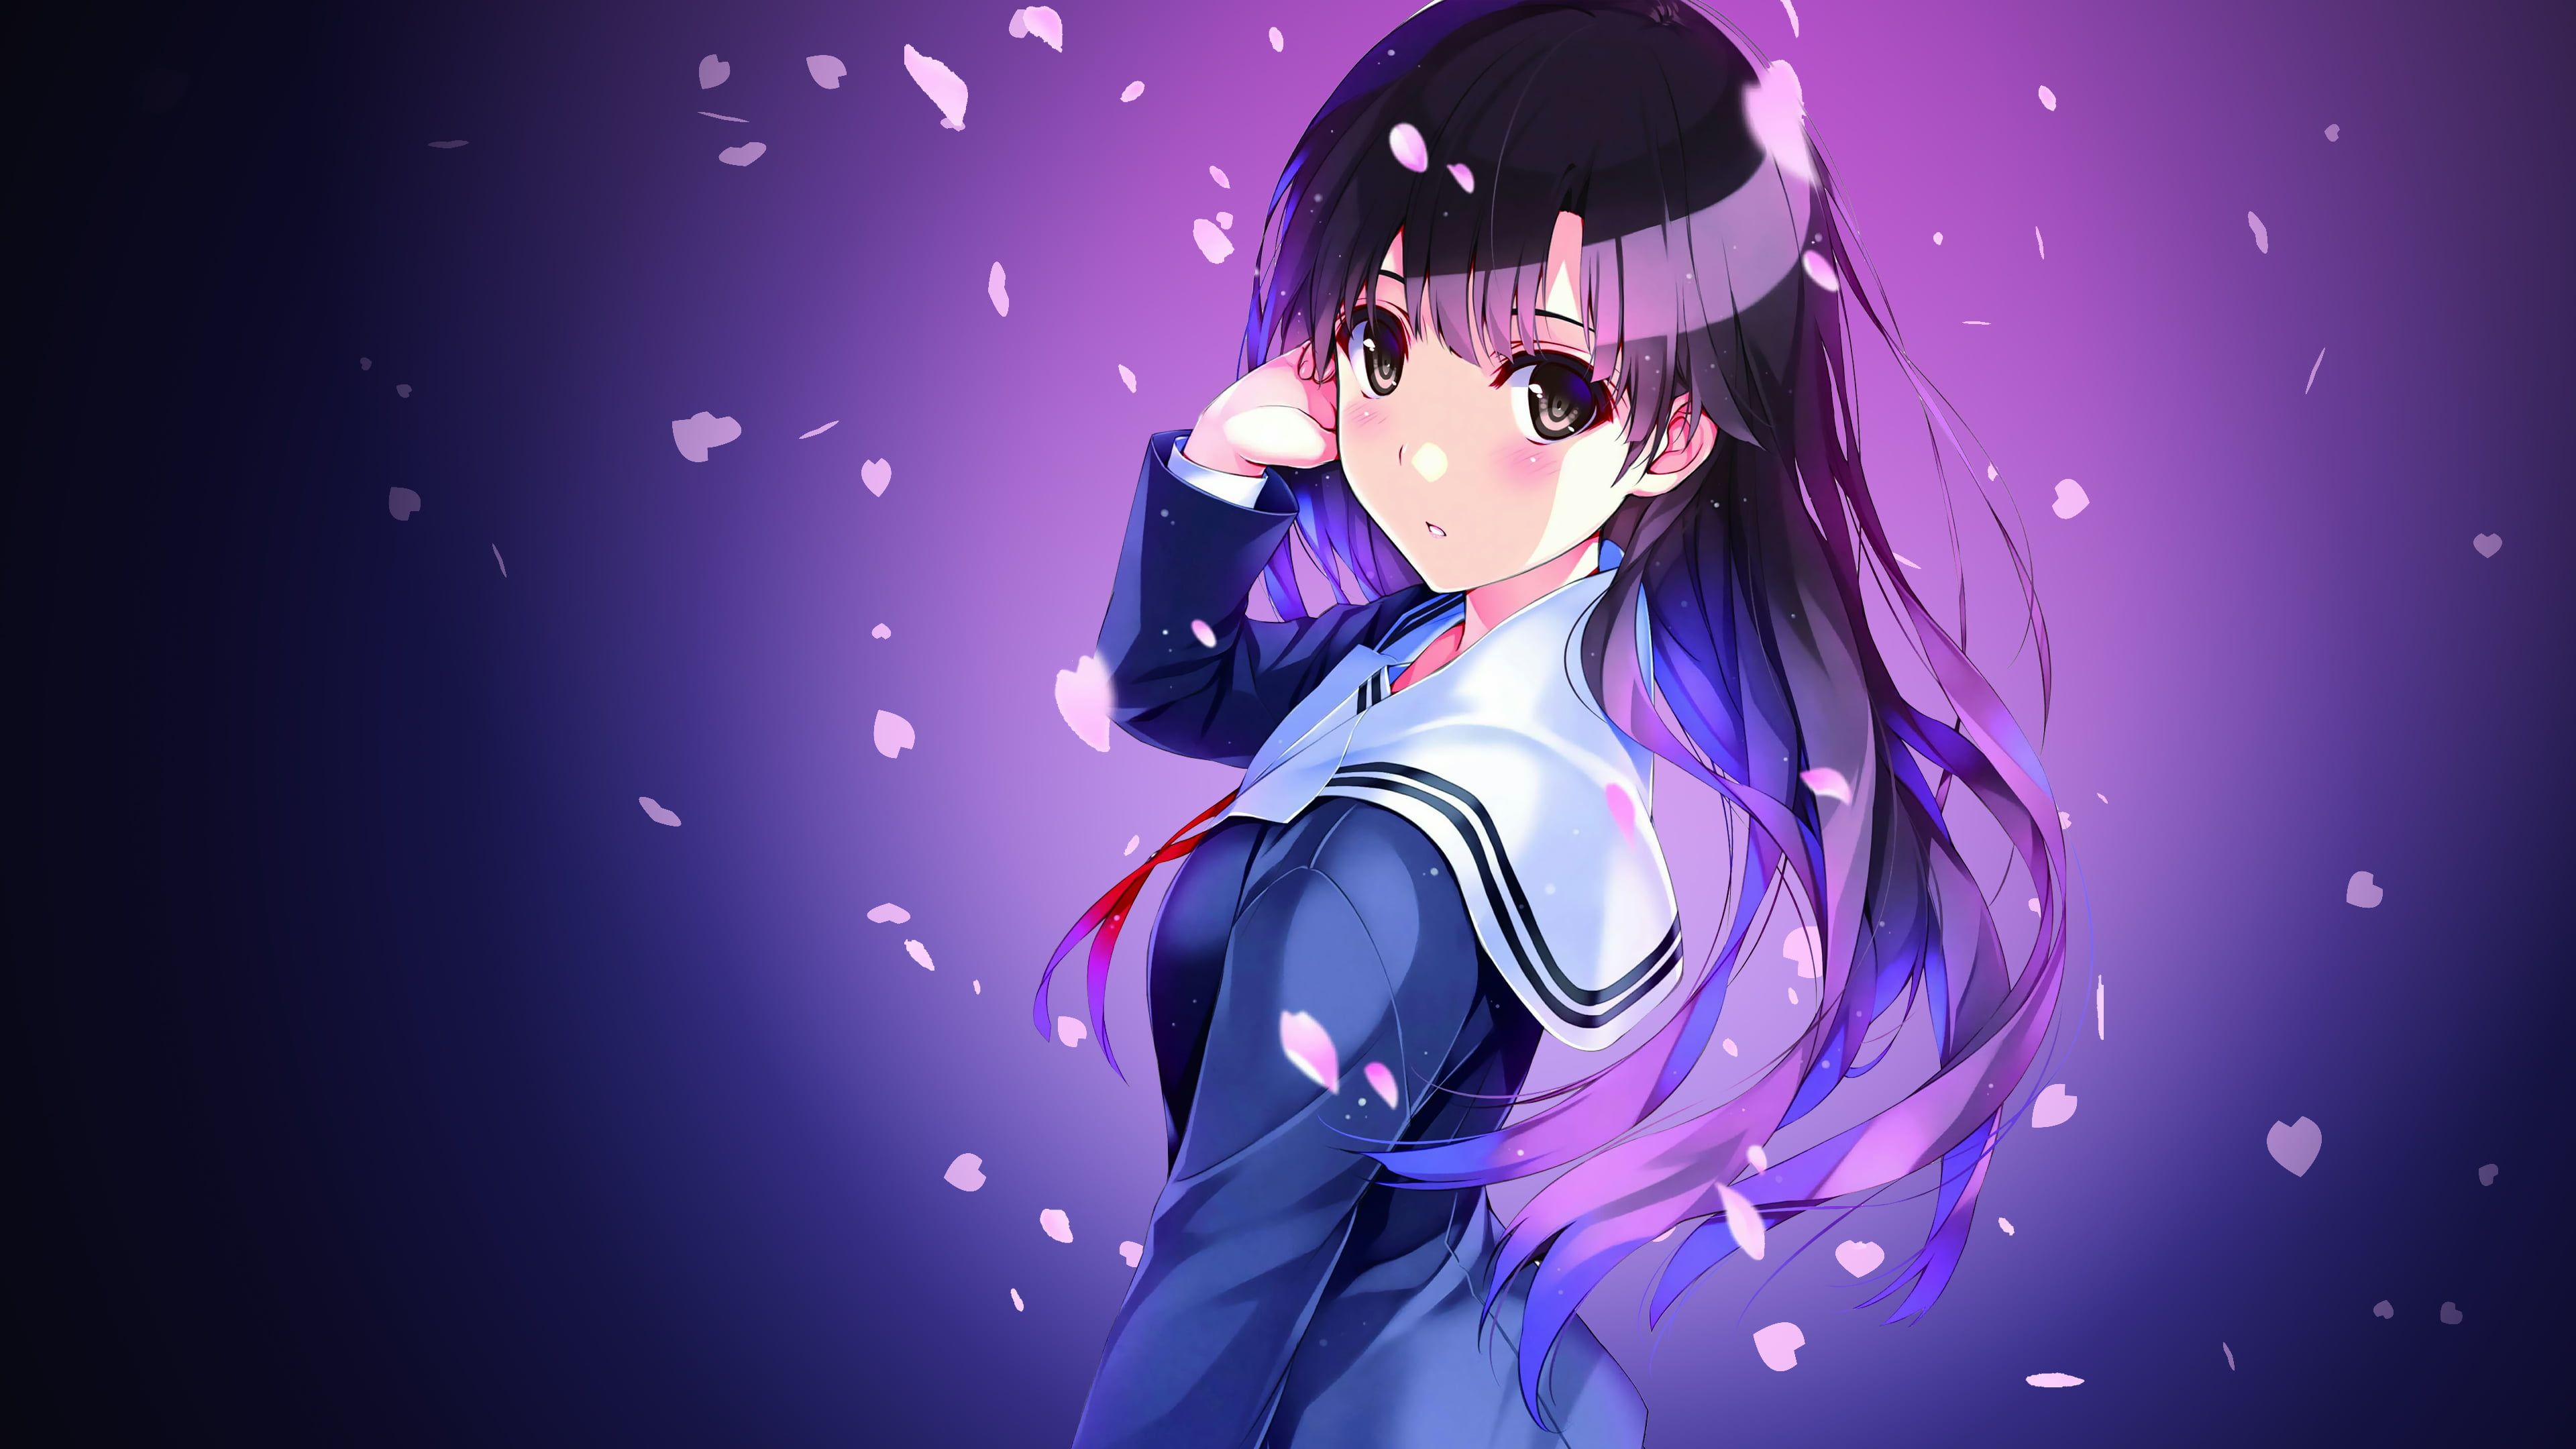 Female anime character with blue dress illustration HD wallpapers